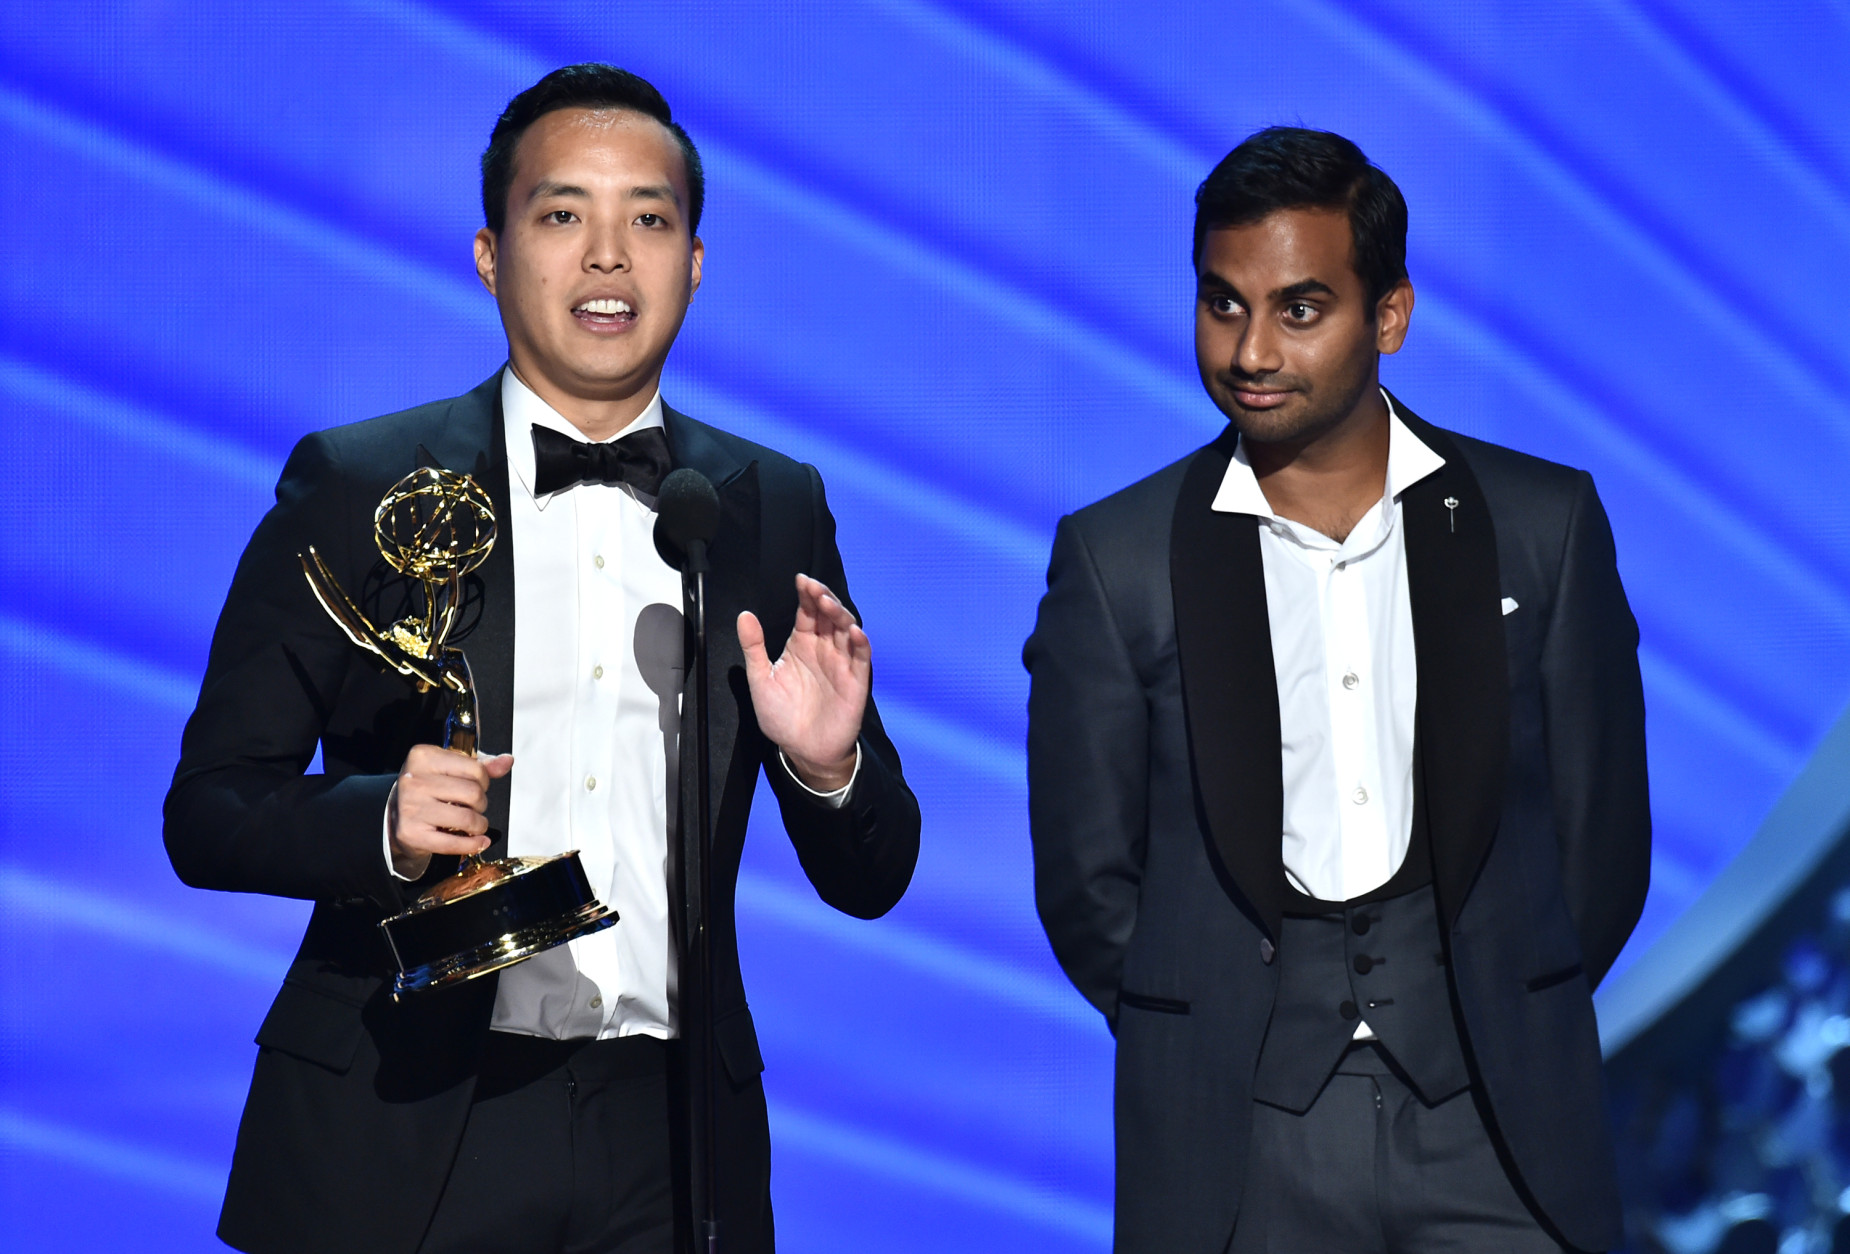 Kelvin Yu, left, and Aziz Ansari accept the award for outstanding writing for a comedy series for Master of None at the 68th Primetime Emmy Awards on Sunday, Sept. 18, 2016, at the Microsoft Theater in Los Angeles. (Photo by Vince Bucci/Invision for the Television Academy/AP Images)